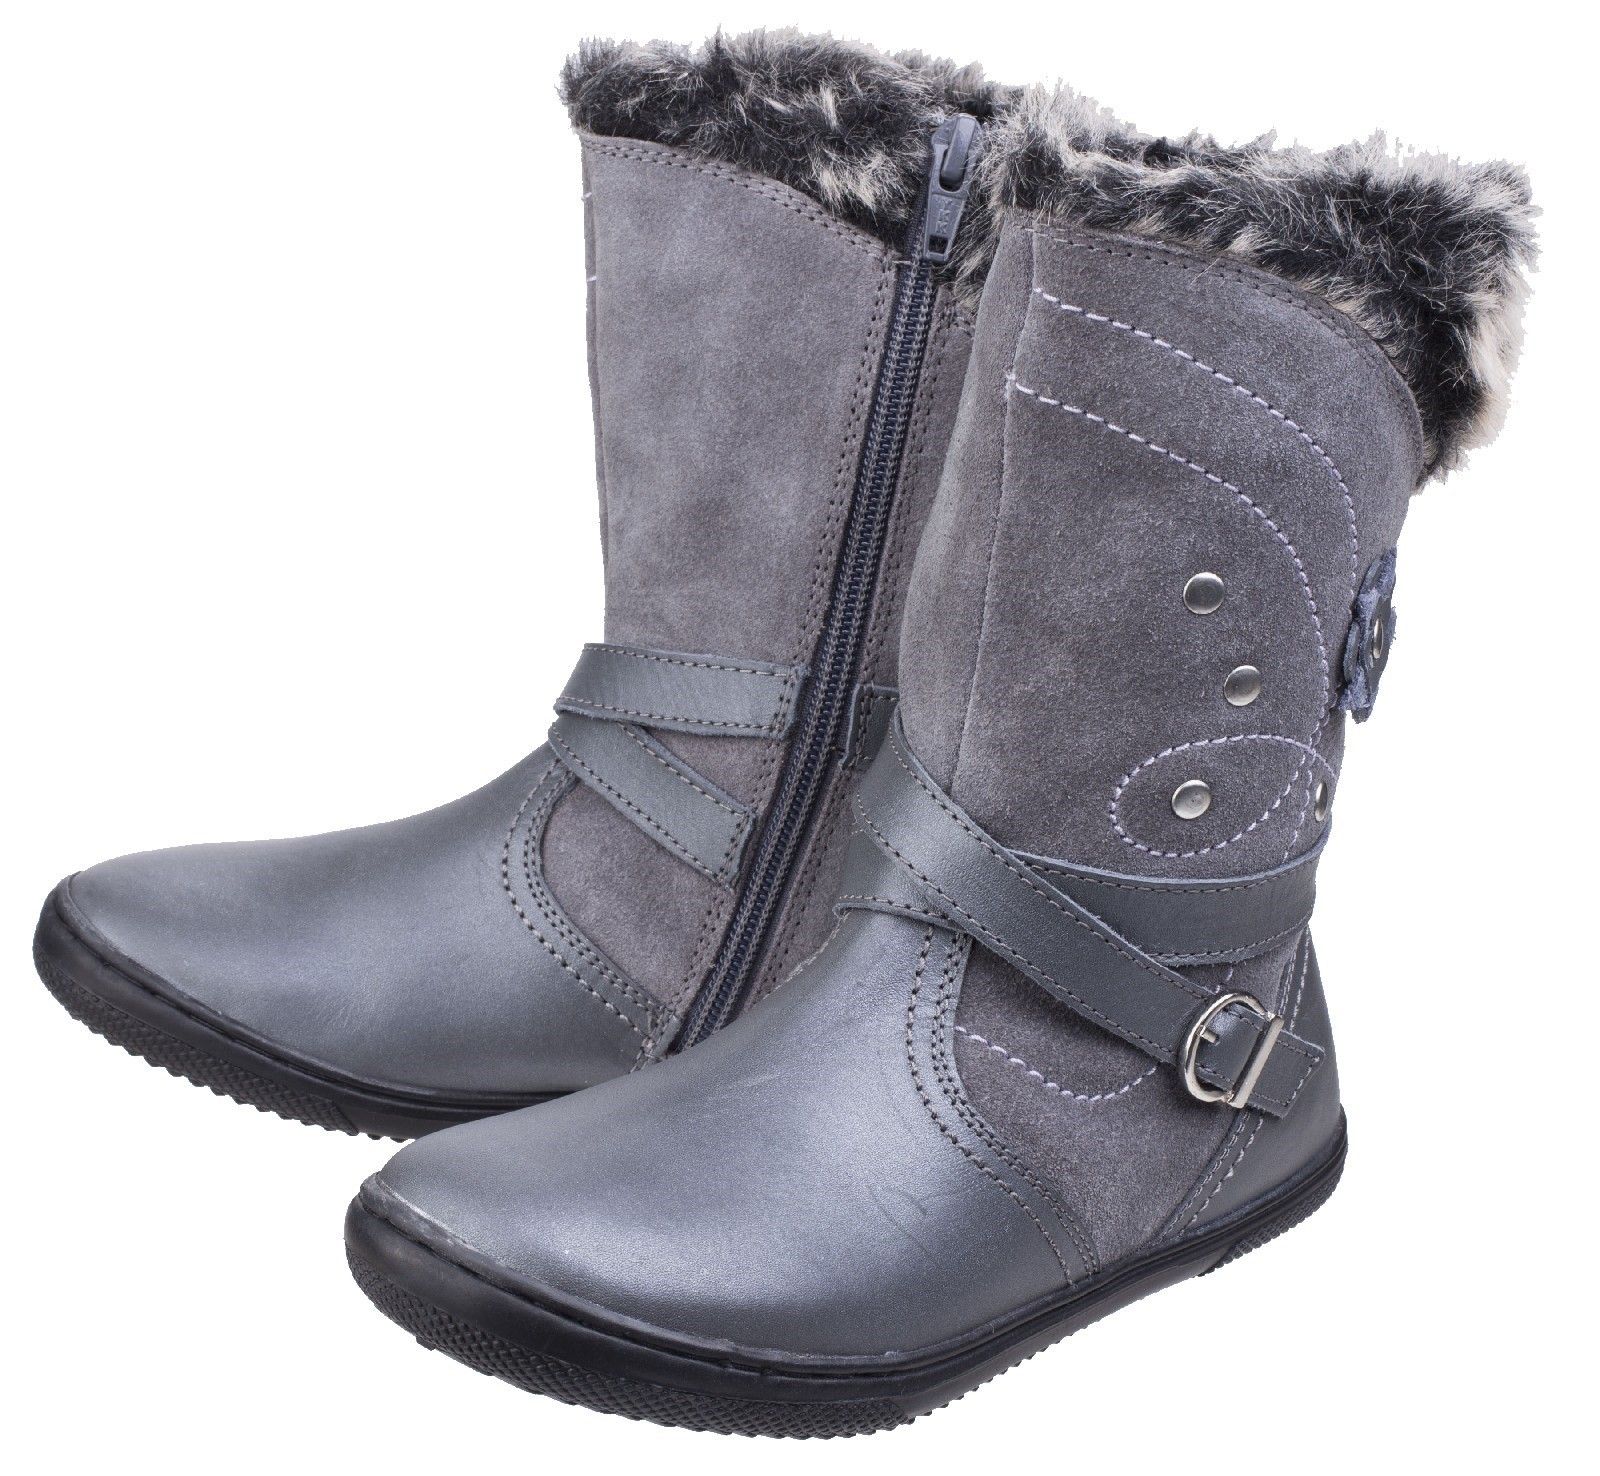 Leather and suede winter boot with buckle and embroidery detail. A fur trim adds to the comfortable look and feel of the boot.Full grain leather uppers. 
Textile lining. 
Boot with zip.